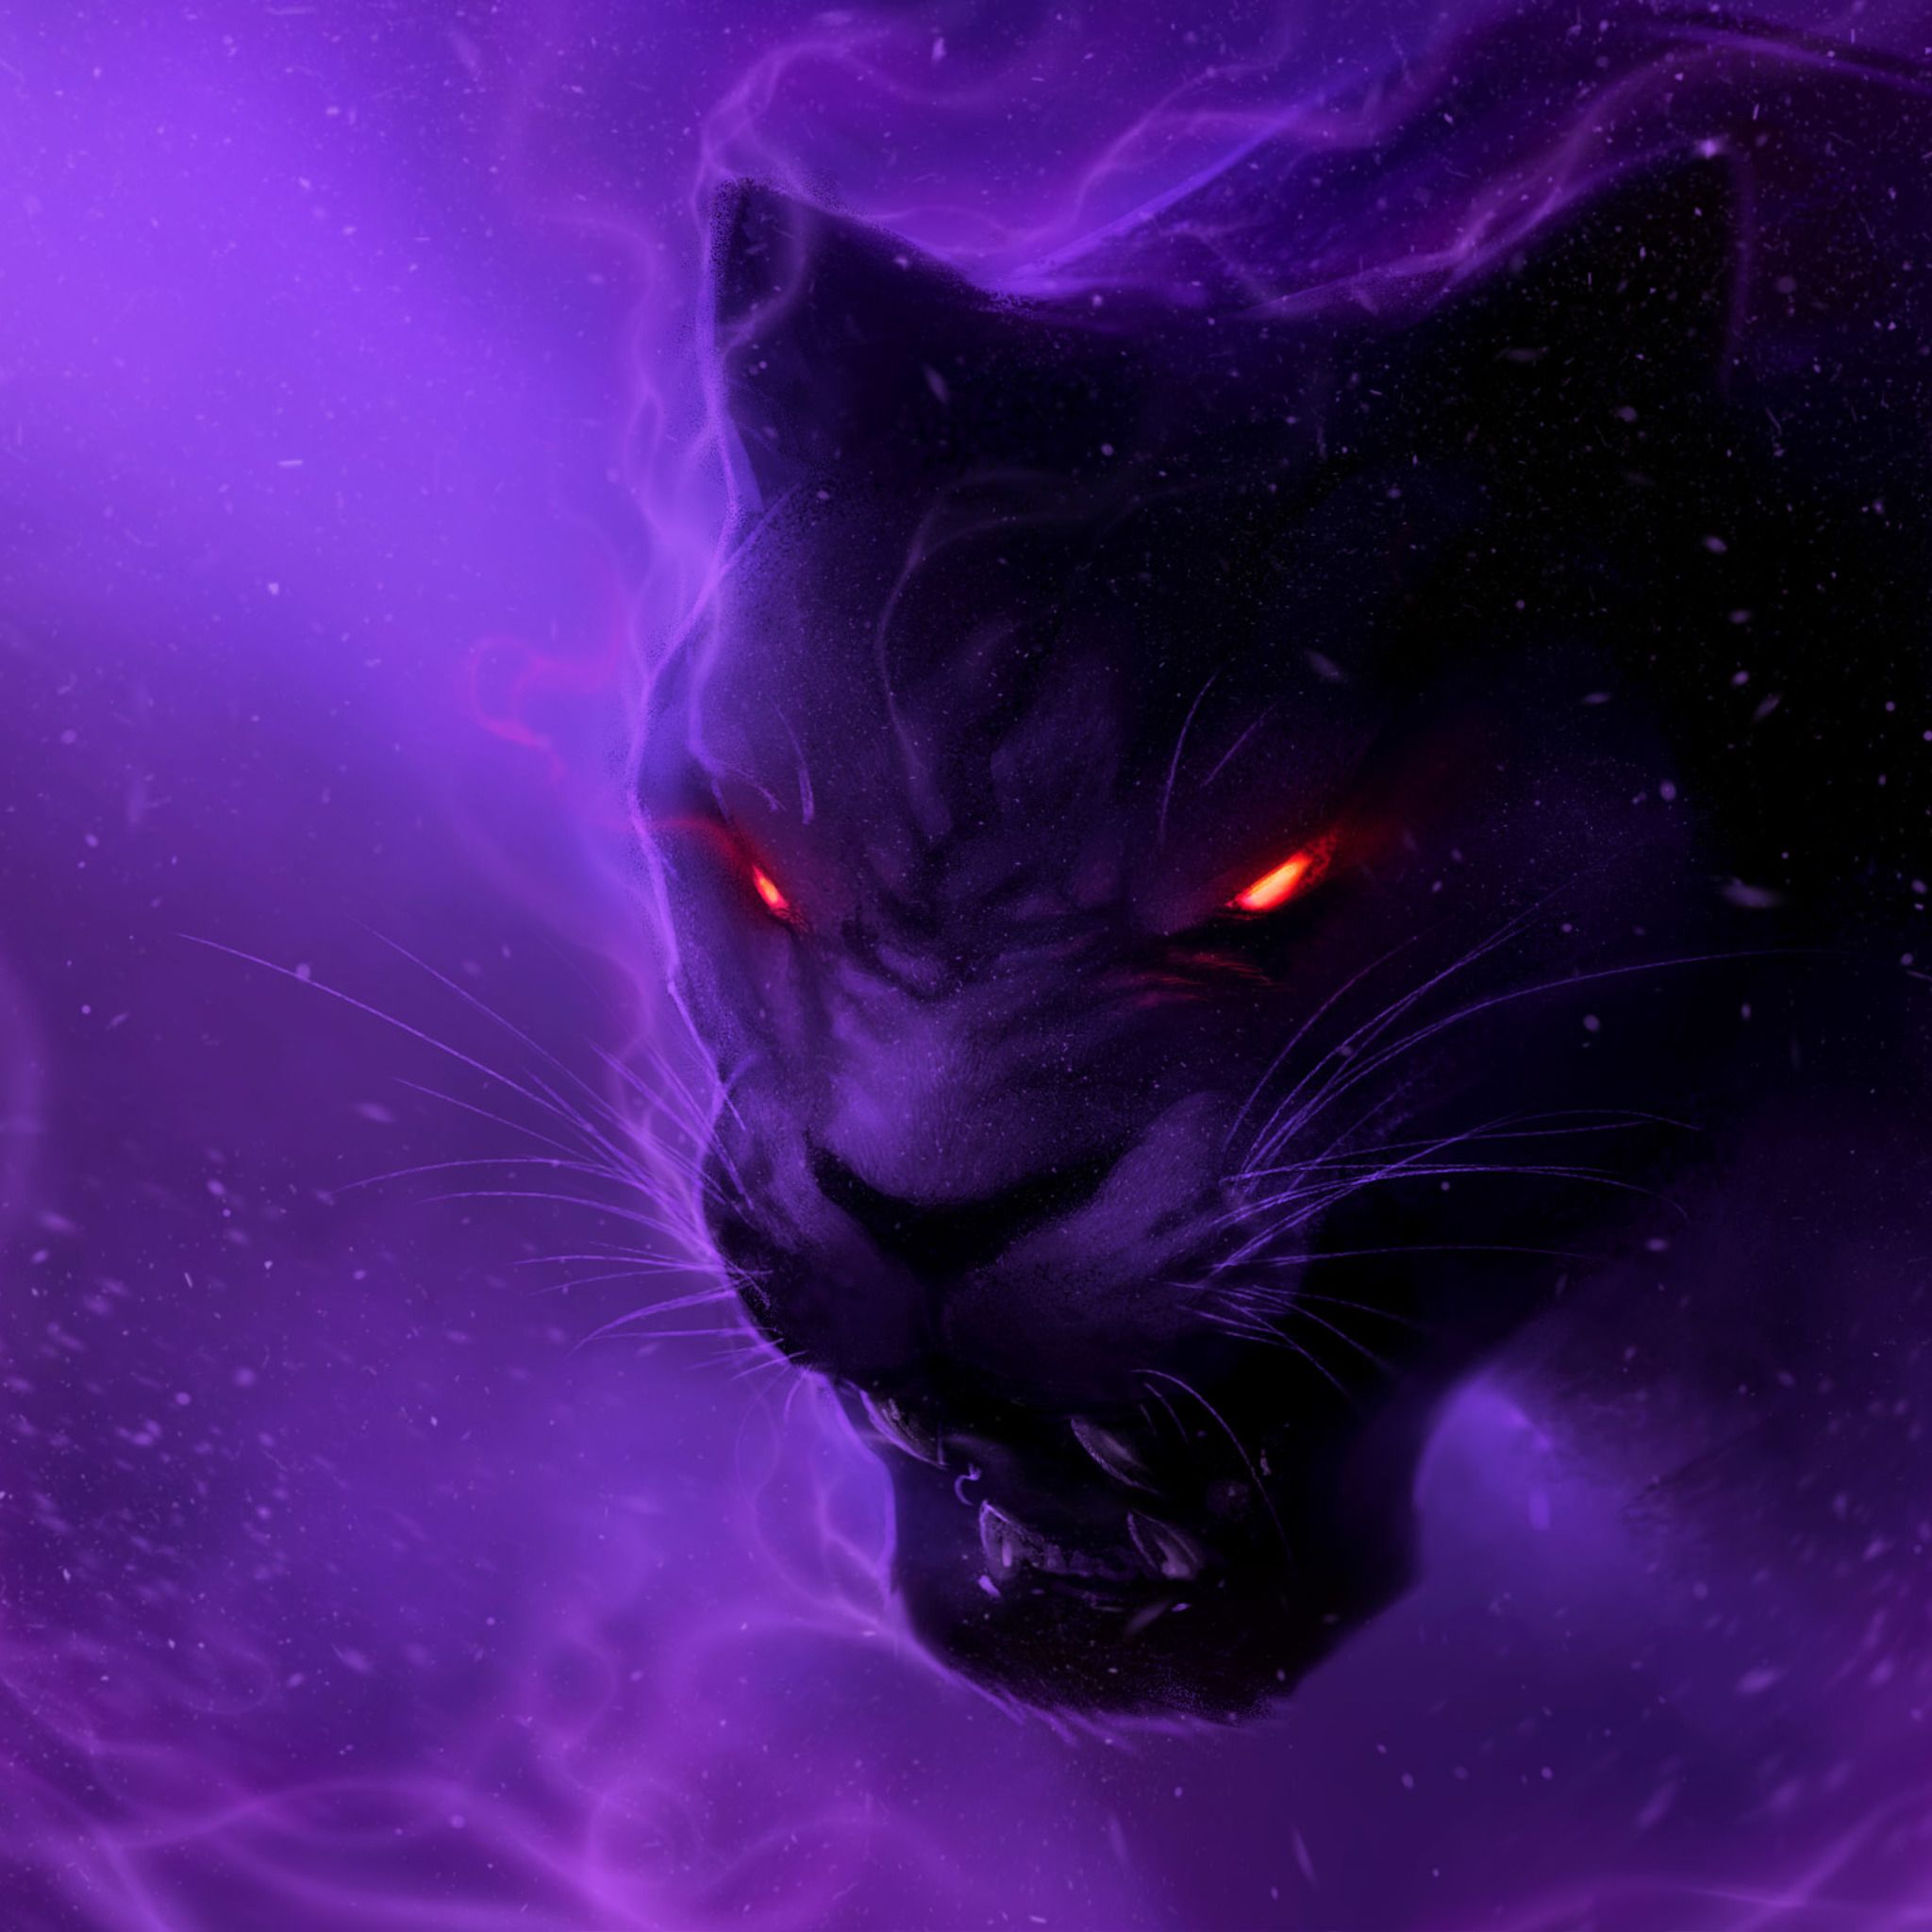 Black Panther Animal  Thunder Lightning And Fire Effect Wallpaper Download   MobCup